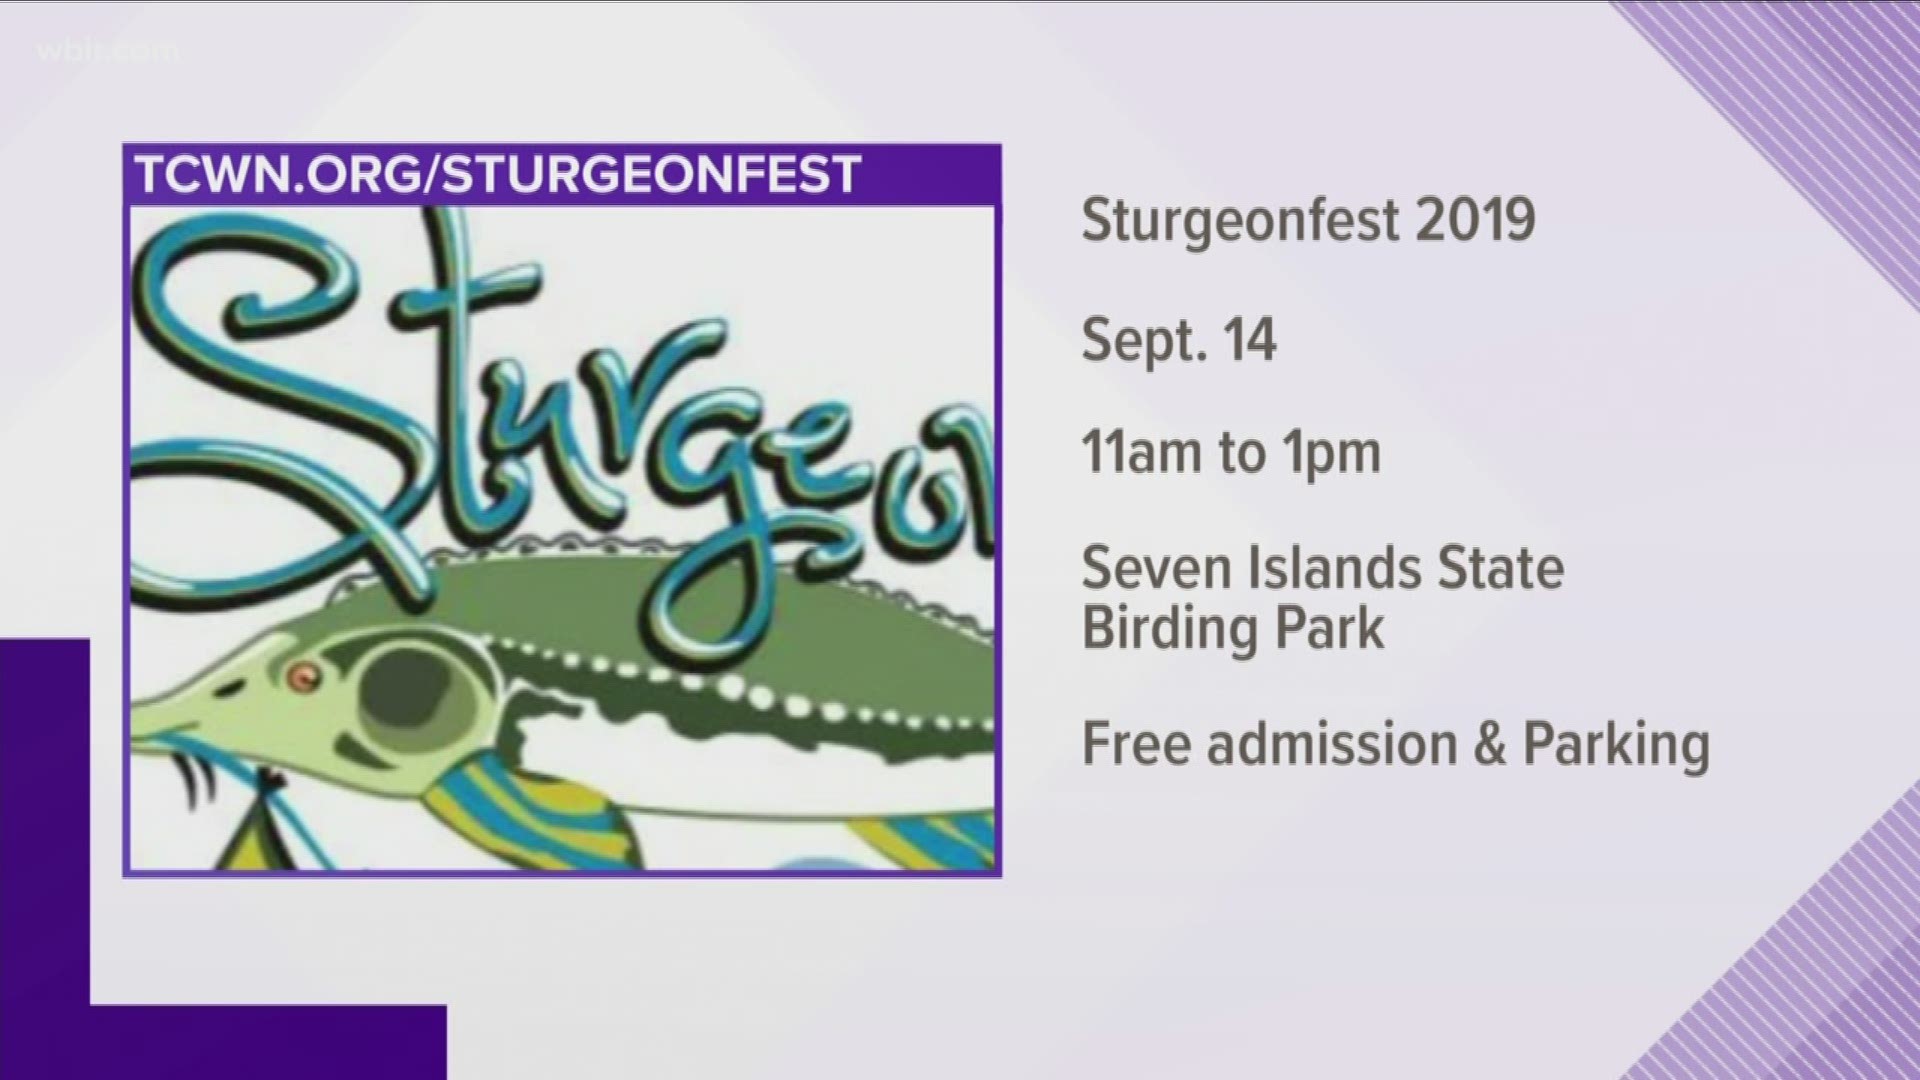 Sturgeonfest is Saturday September 14 at Seven Islands Birding Park. The event starts at 11:00.